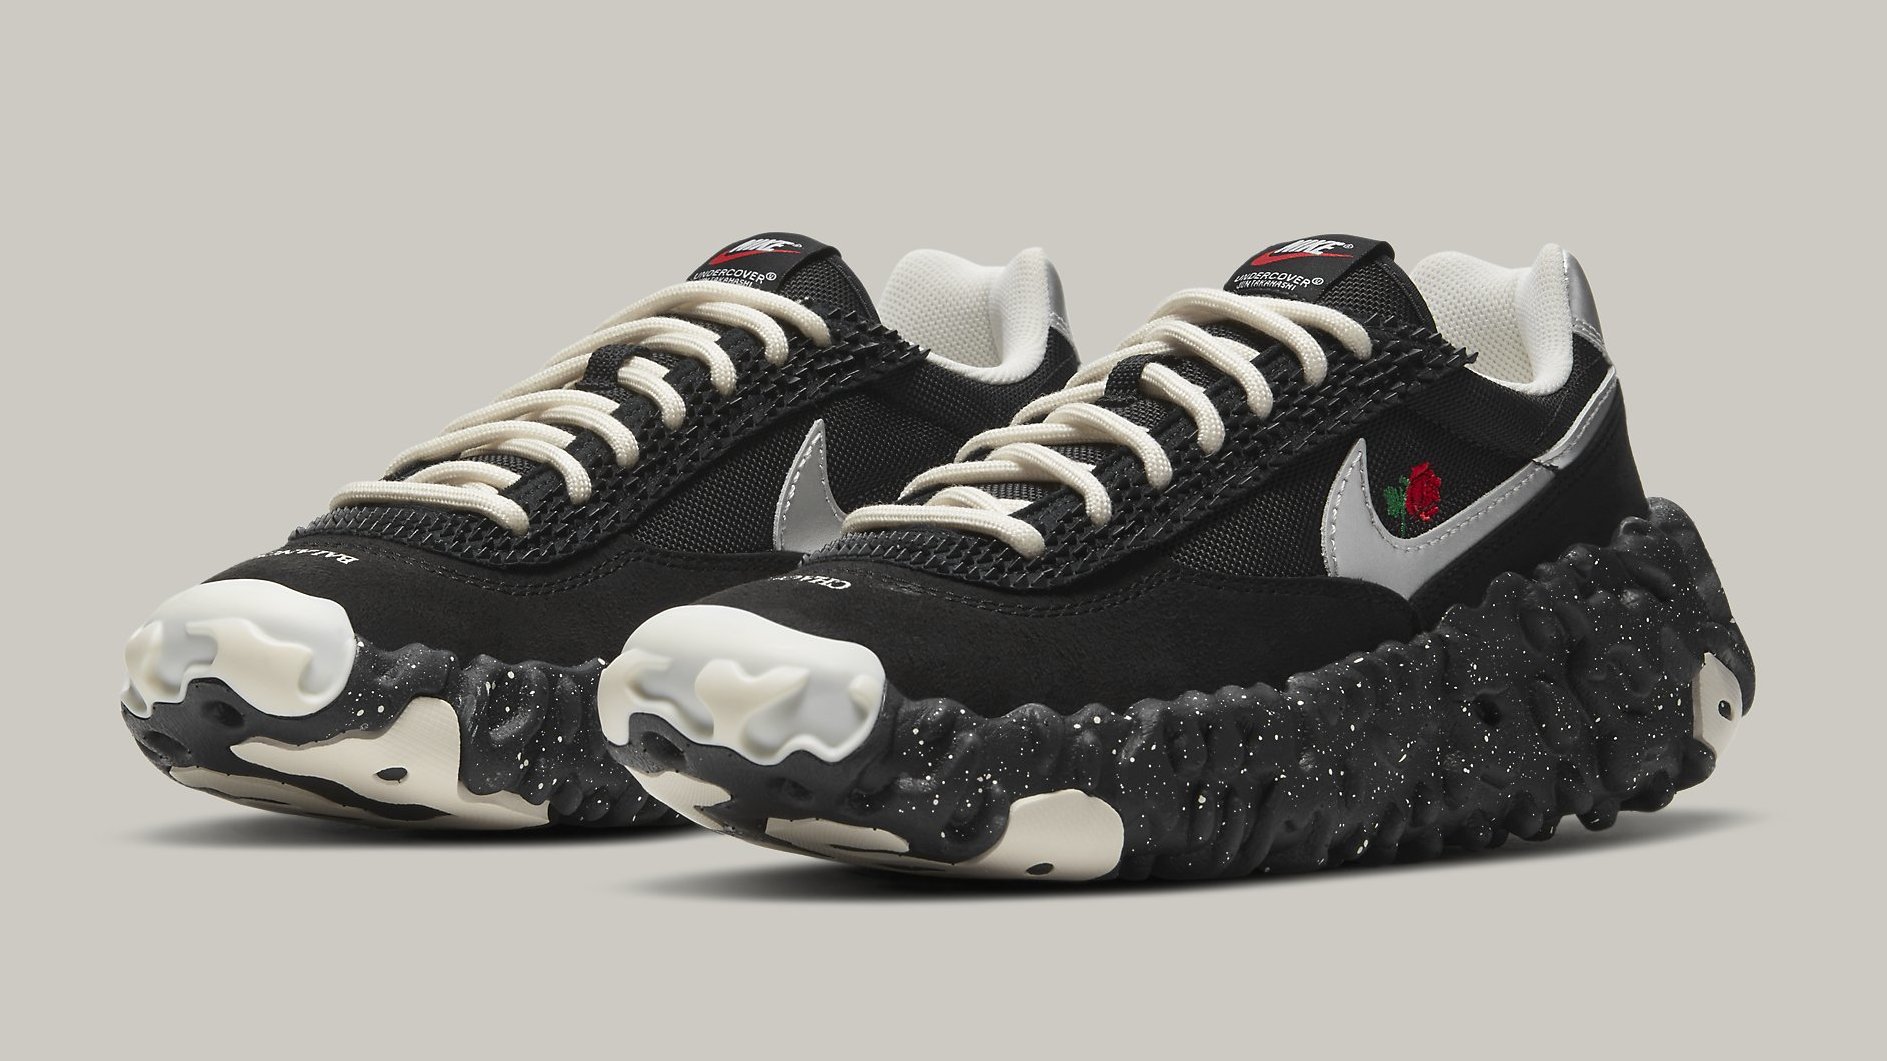 Undercover's Nike Collaboration Releasing Again Complex